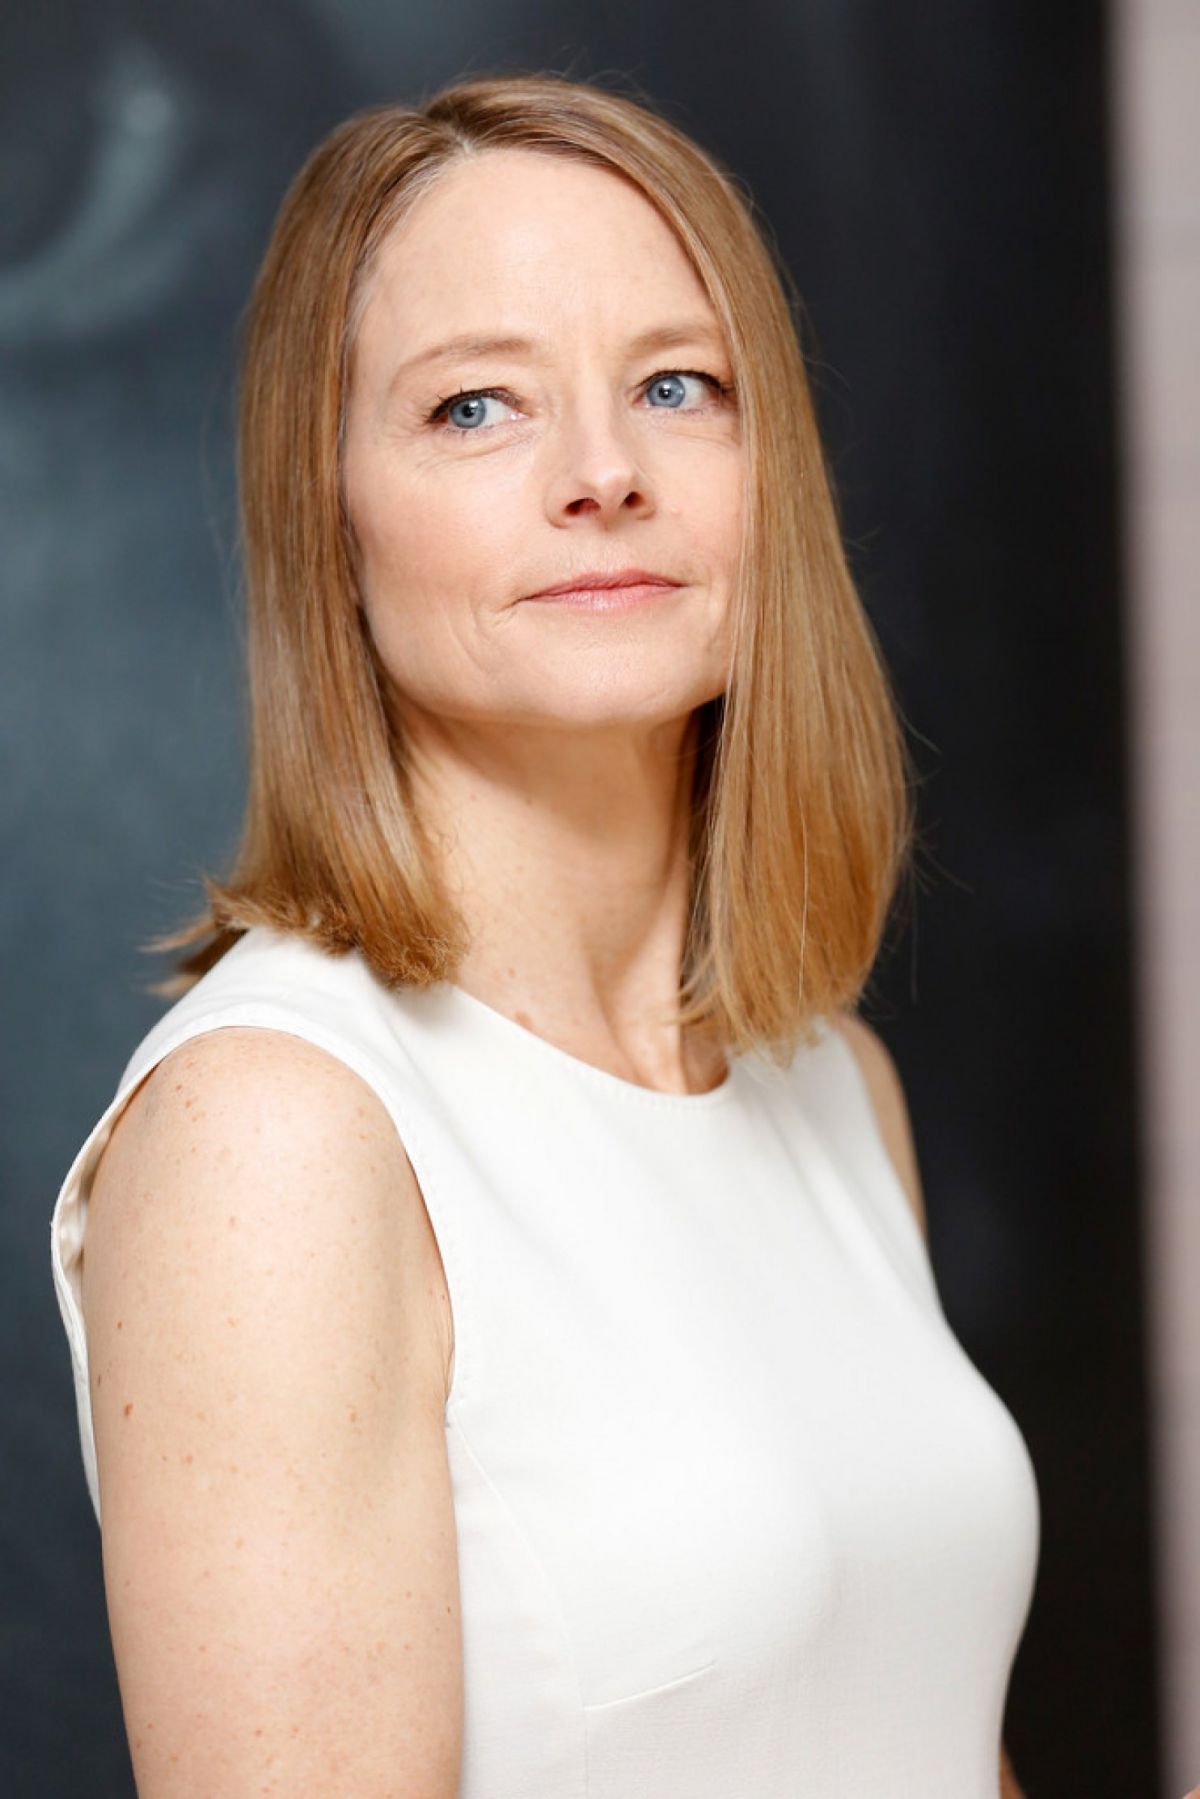 JODIE FOSTER at Kering Women in Motion at the 69th Annual Cannes Film